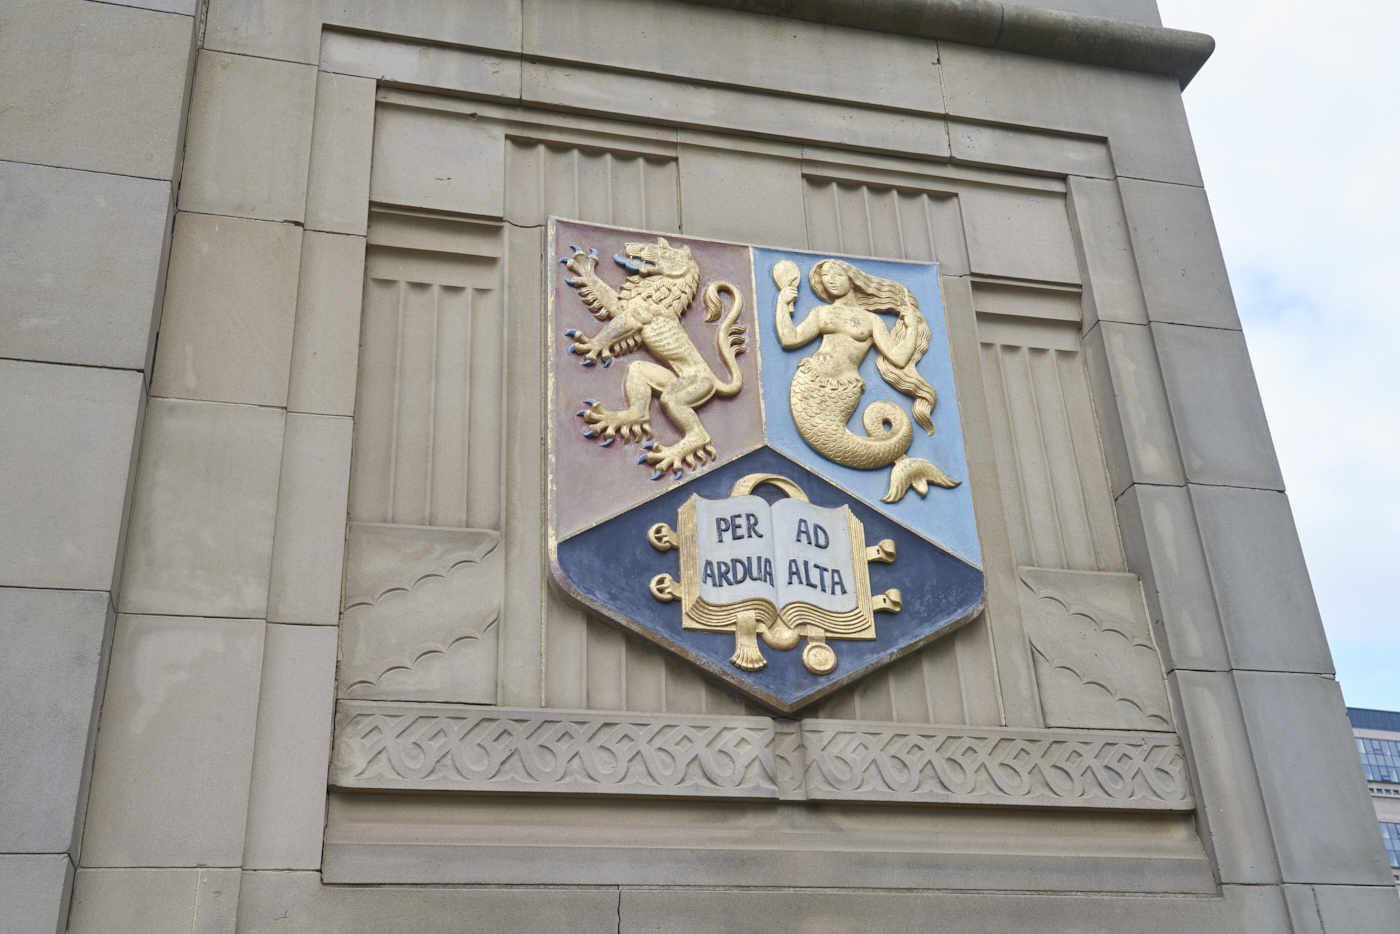 Carved and gilded stone heraldic shield set into the wall of the Barber Institute of Fine Arts by Gordon Herickx featuring a mermaid and a double-headed lion